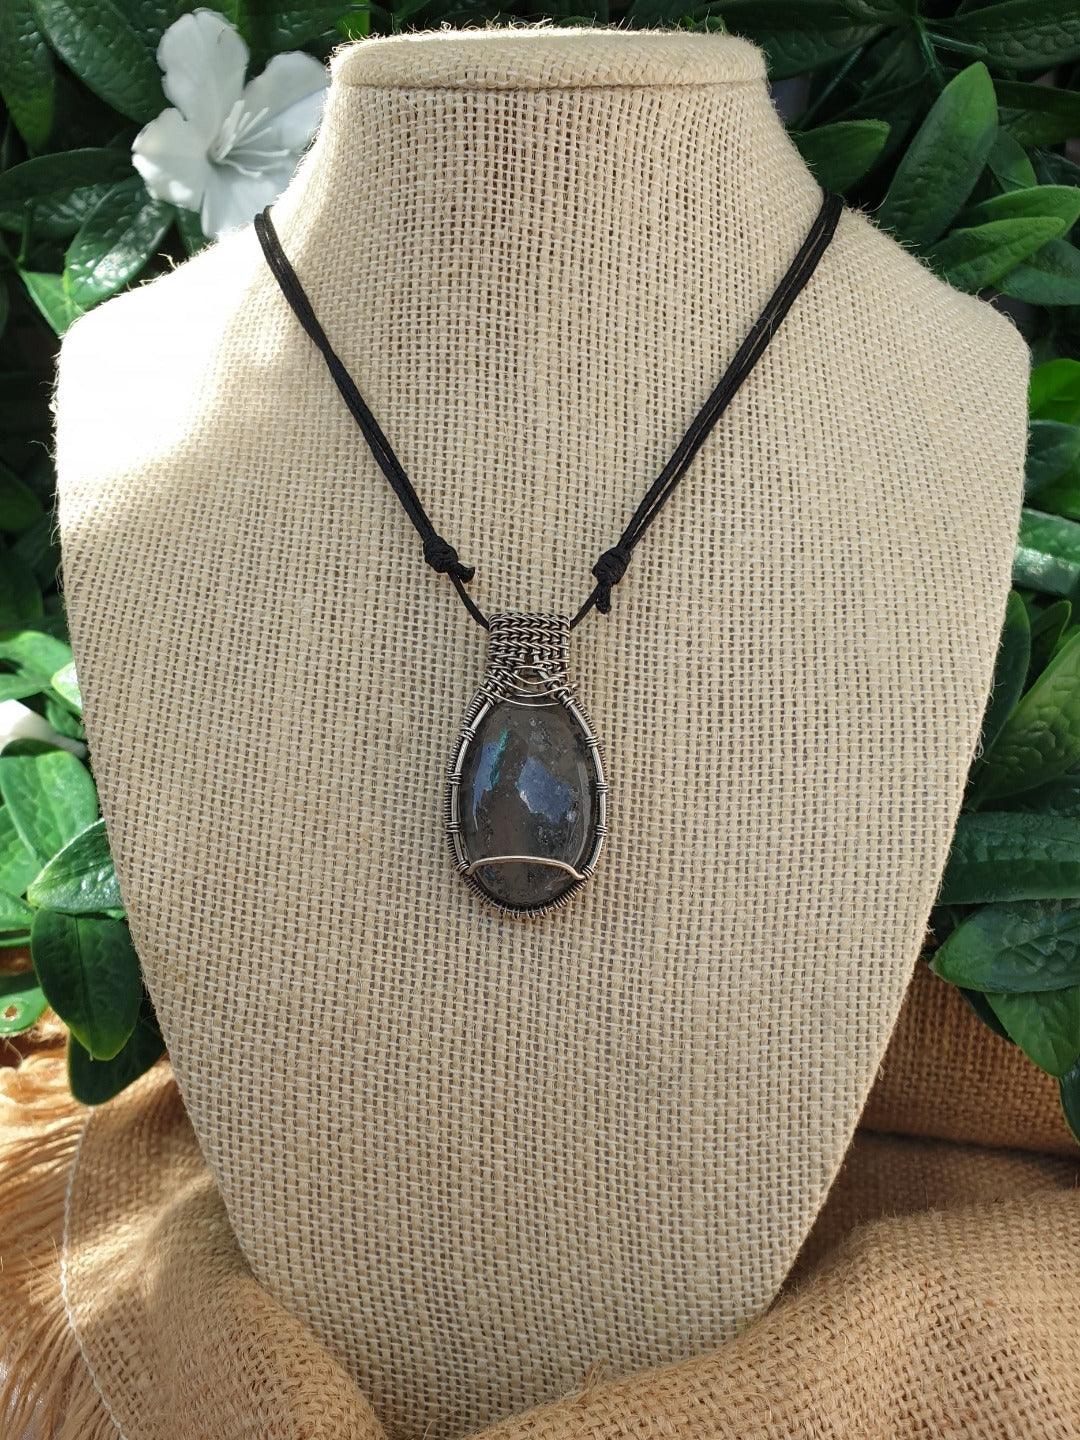 Black Sunstone and Sterling Silver Necklace